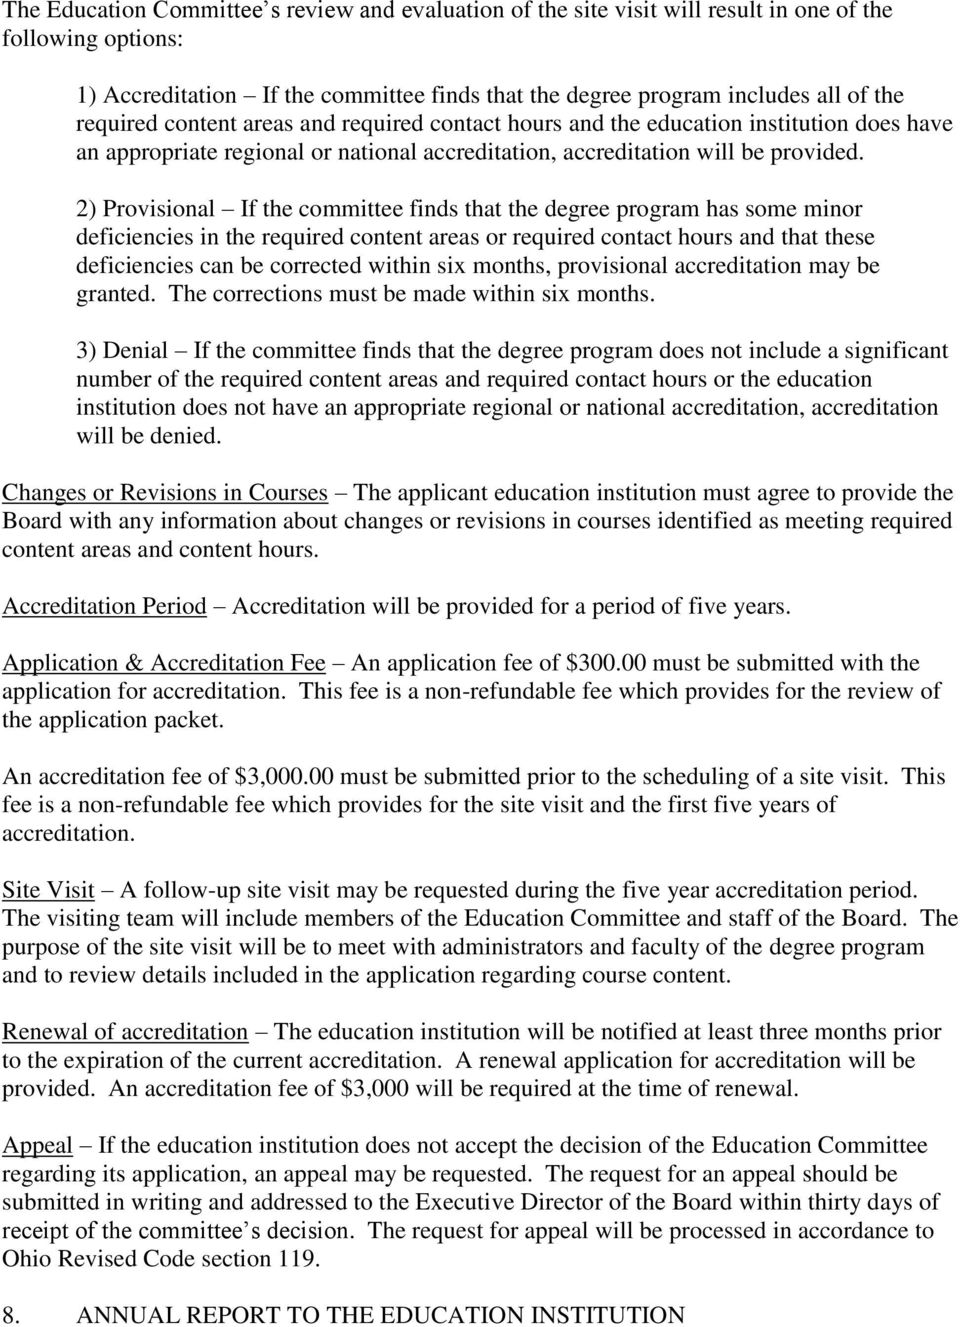 2) Provisional If the committee finds that the degree program has some minor deficiencies in the content areas or contact hours and that these deficiencies can be corrected within six months,